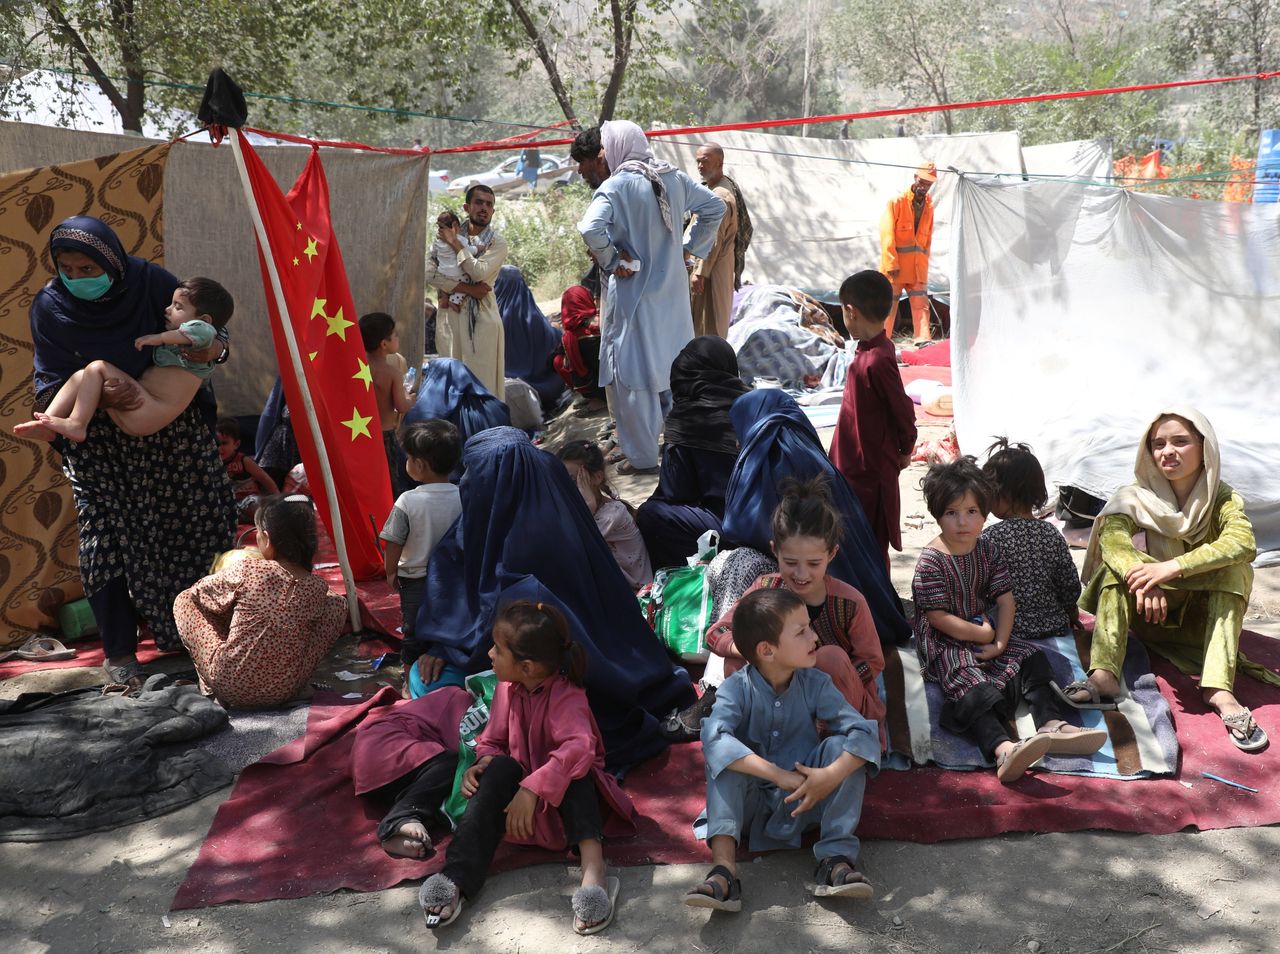 Displaced families who fled from their homes take shelter in a public park in Kabul.